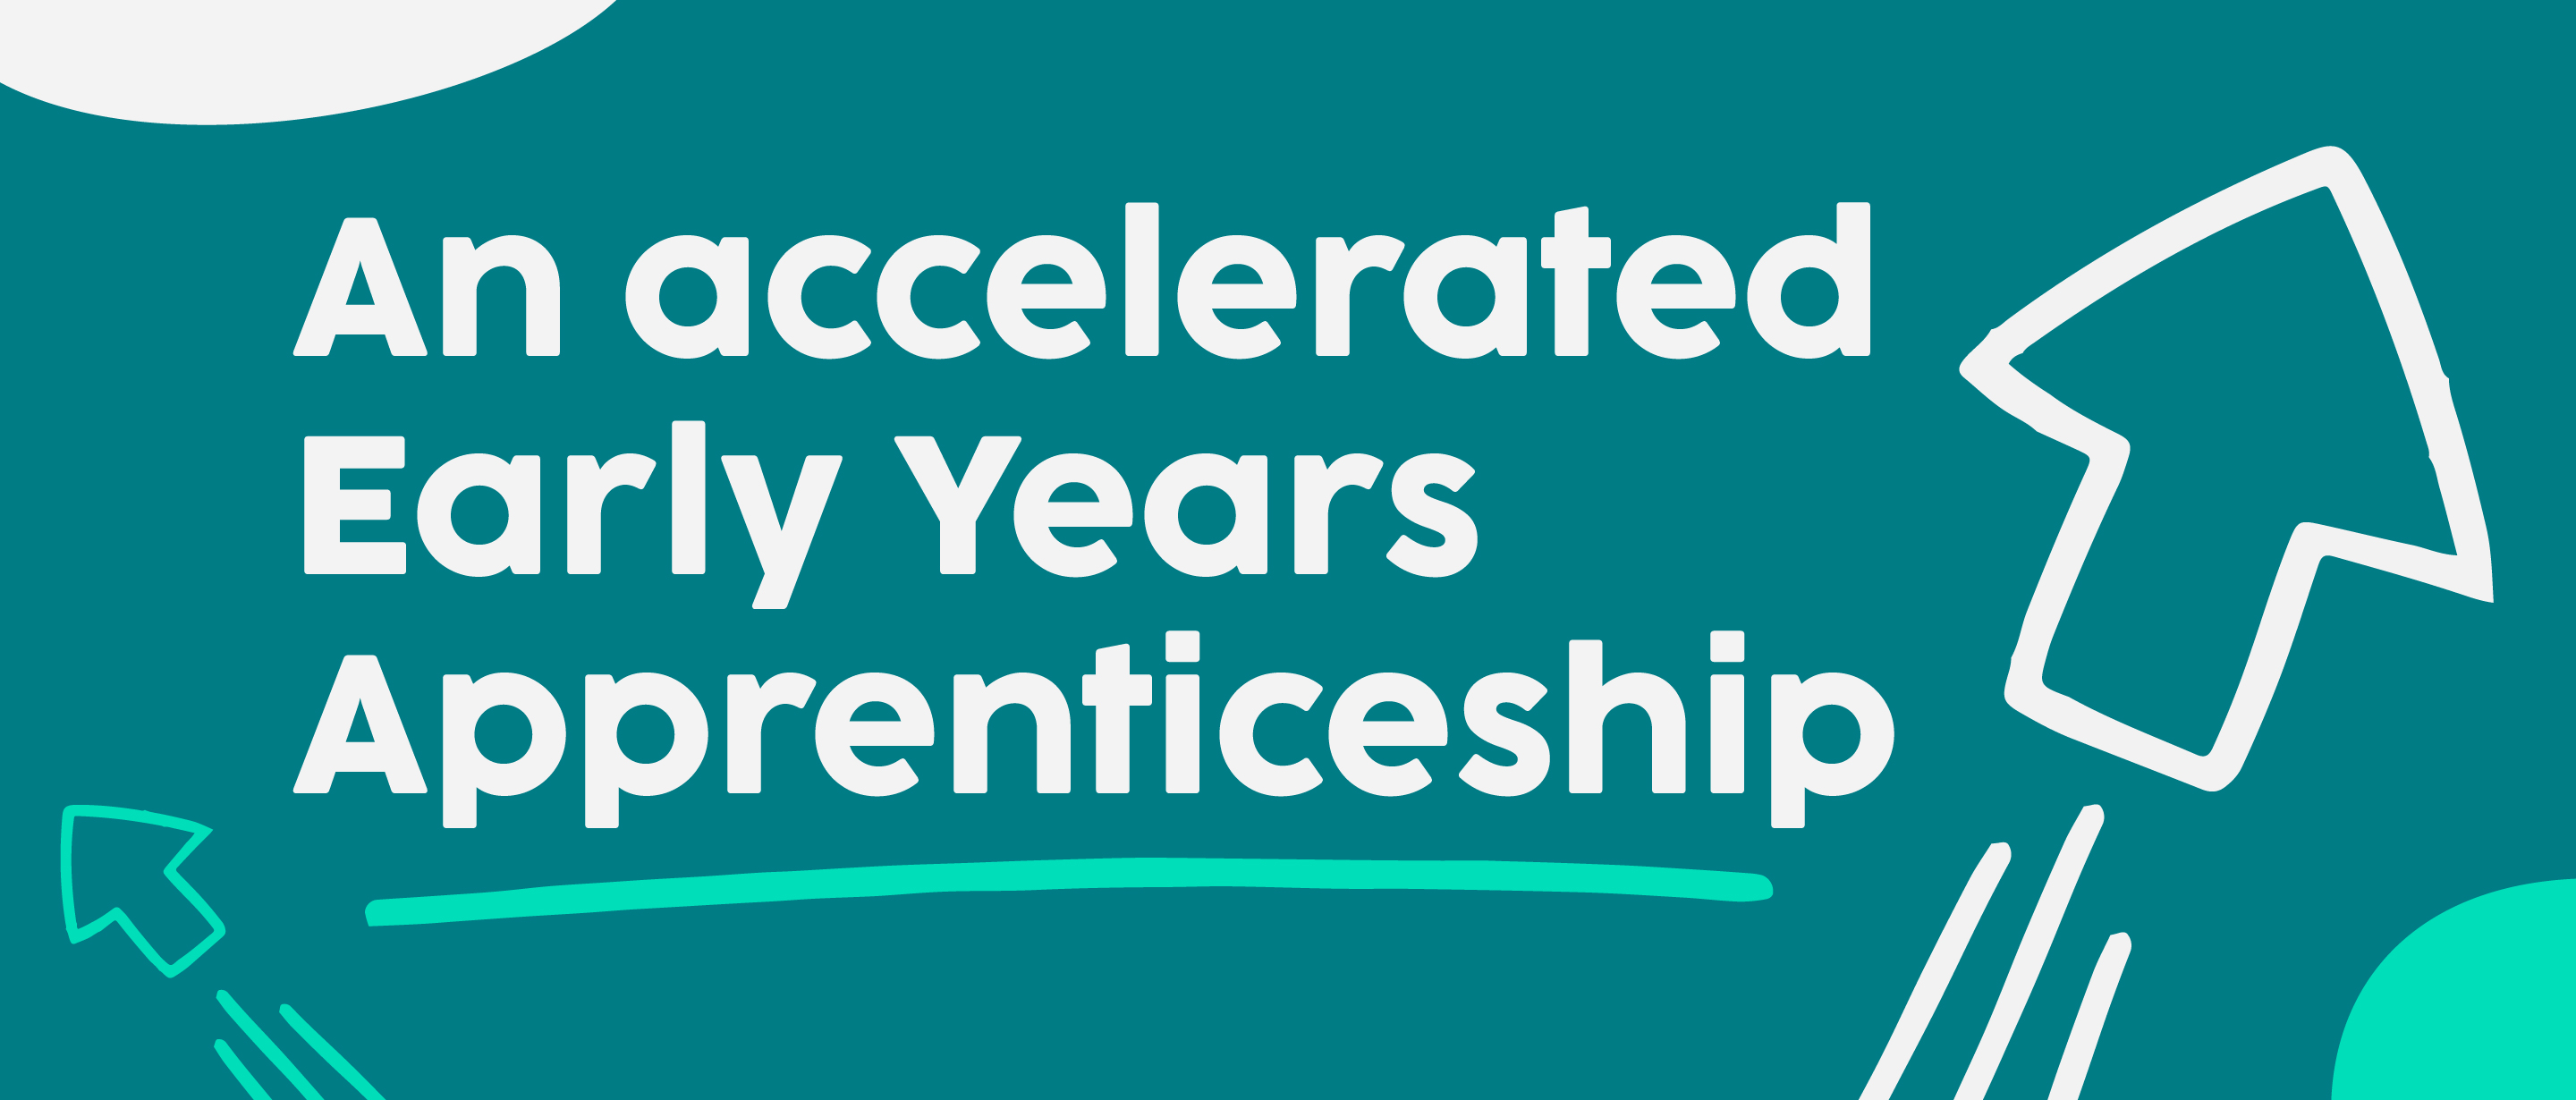 An accelerated Early Years Apprenticeship